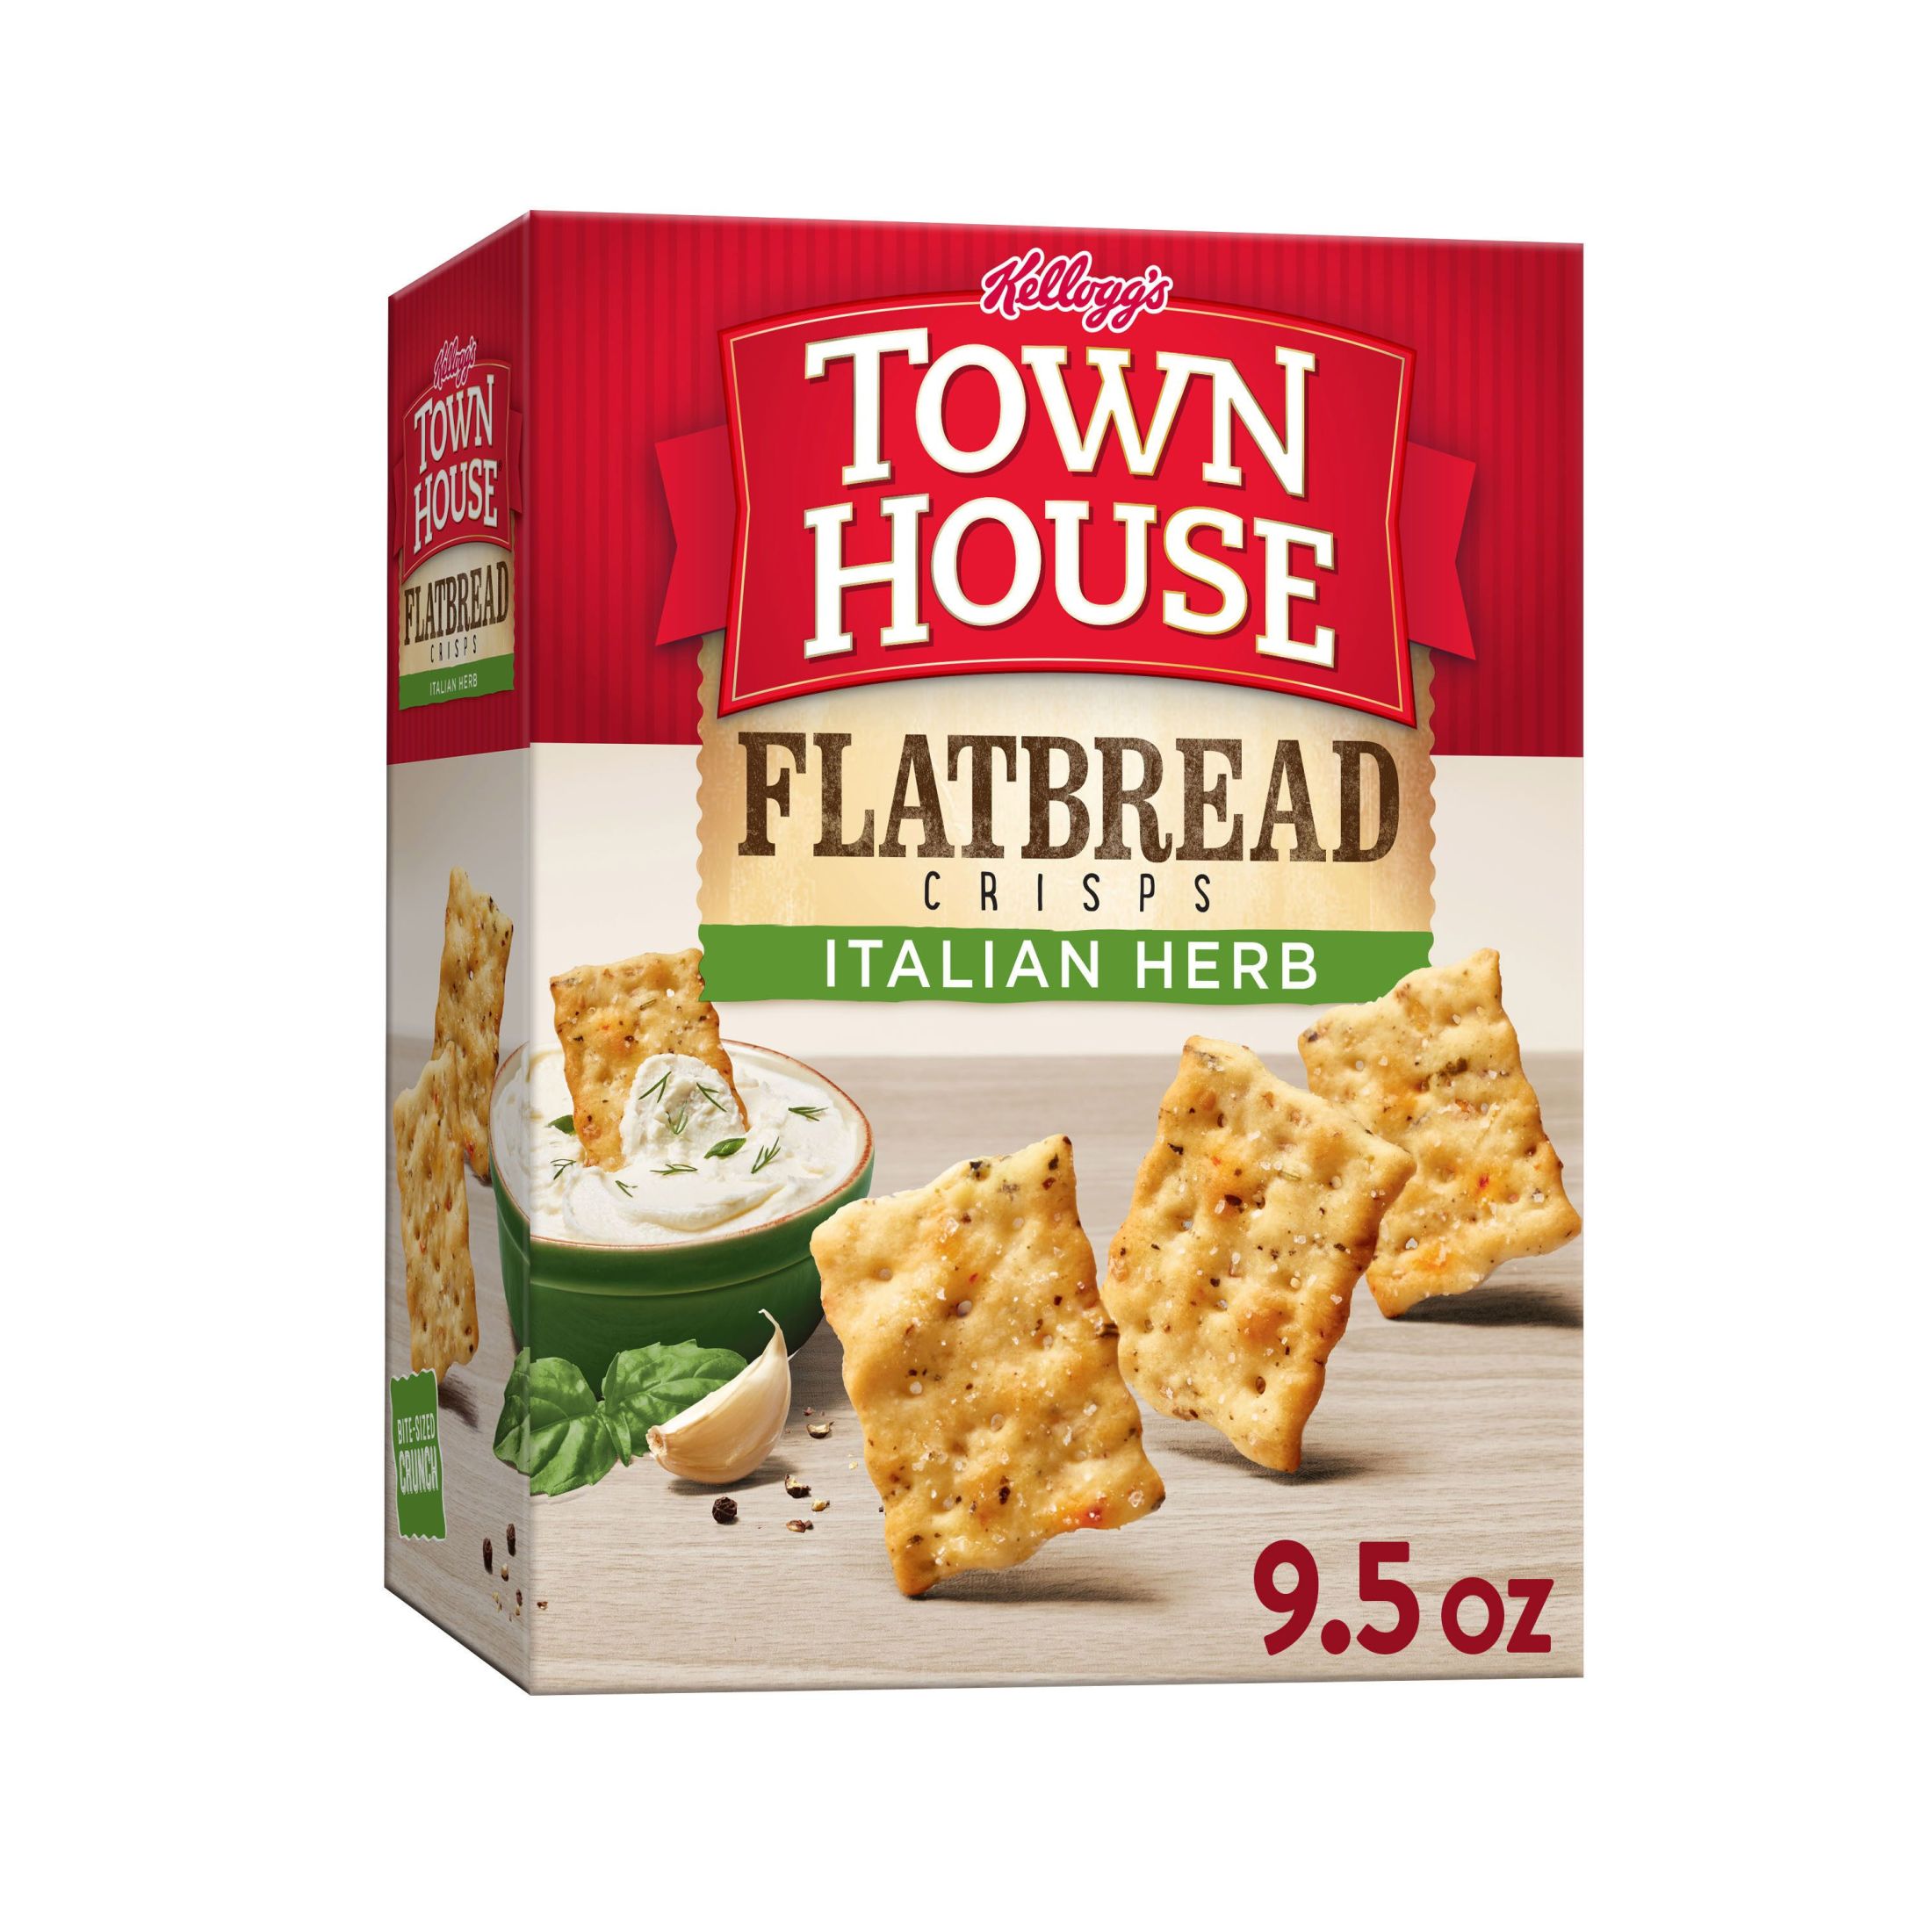 Town House Flatbread Crisps Italian Herb Oven Baked Crackers, Party Snacks, 9.5 oz - image 1 of 10